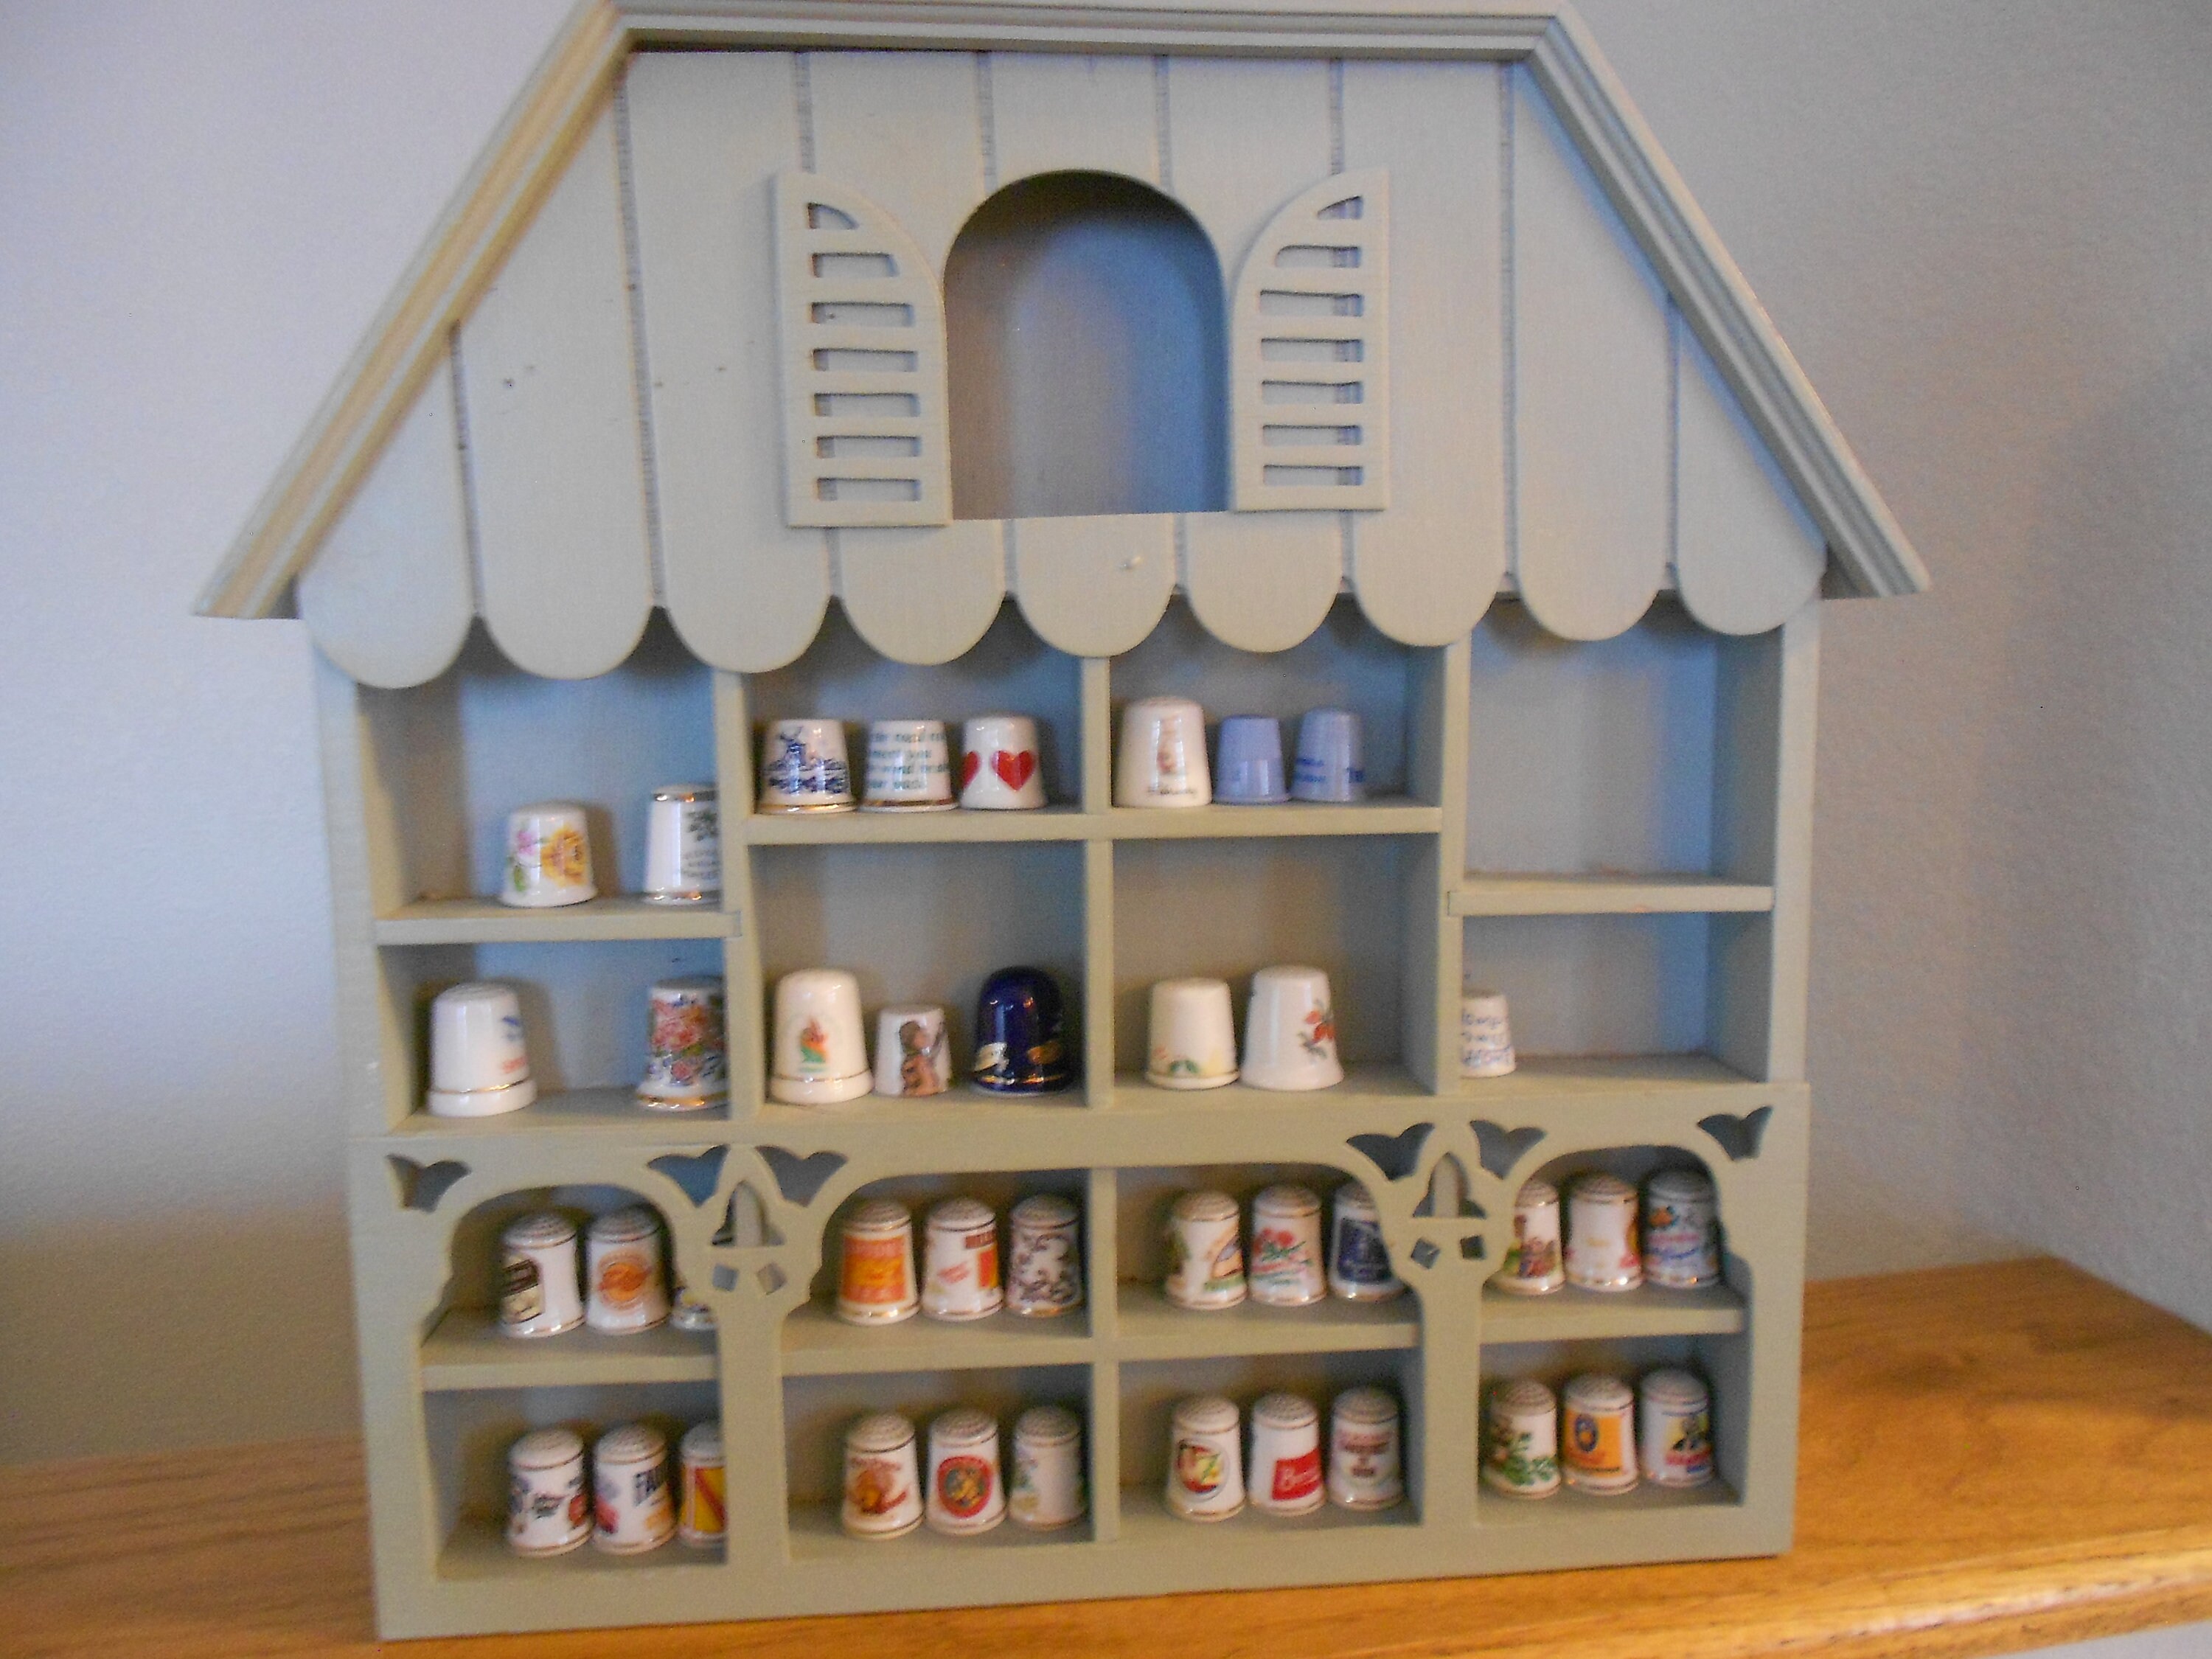 Thimble display cases… who knew?? #trinkets